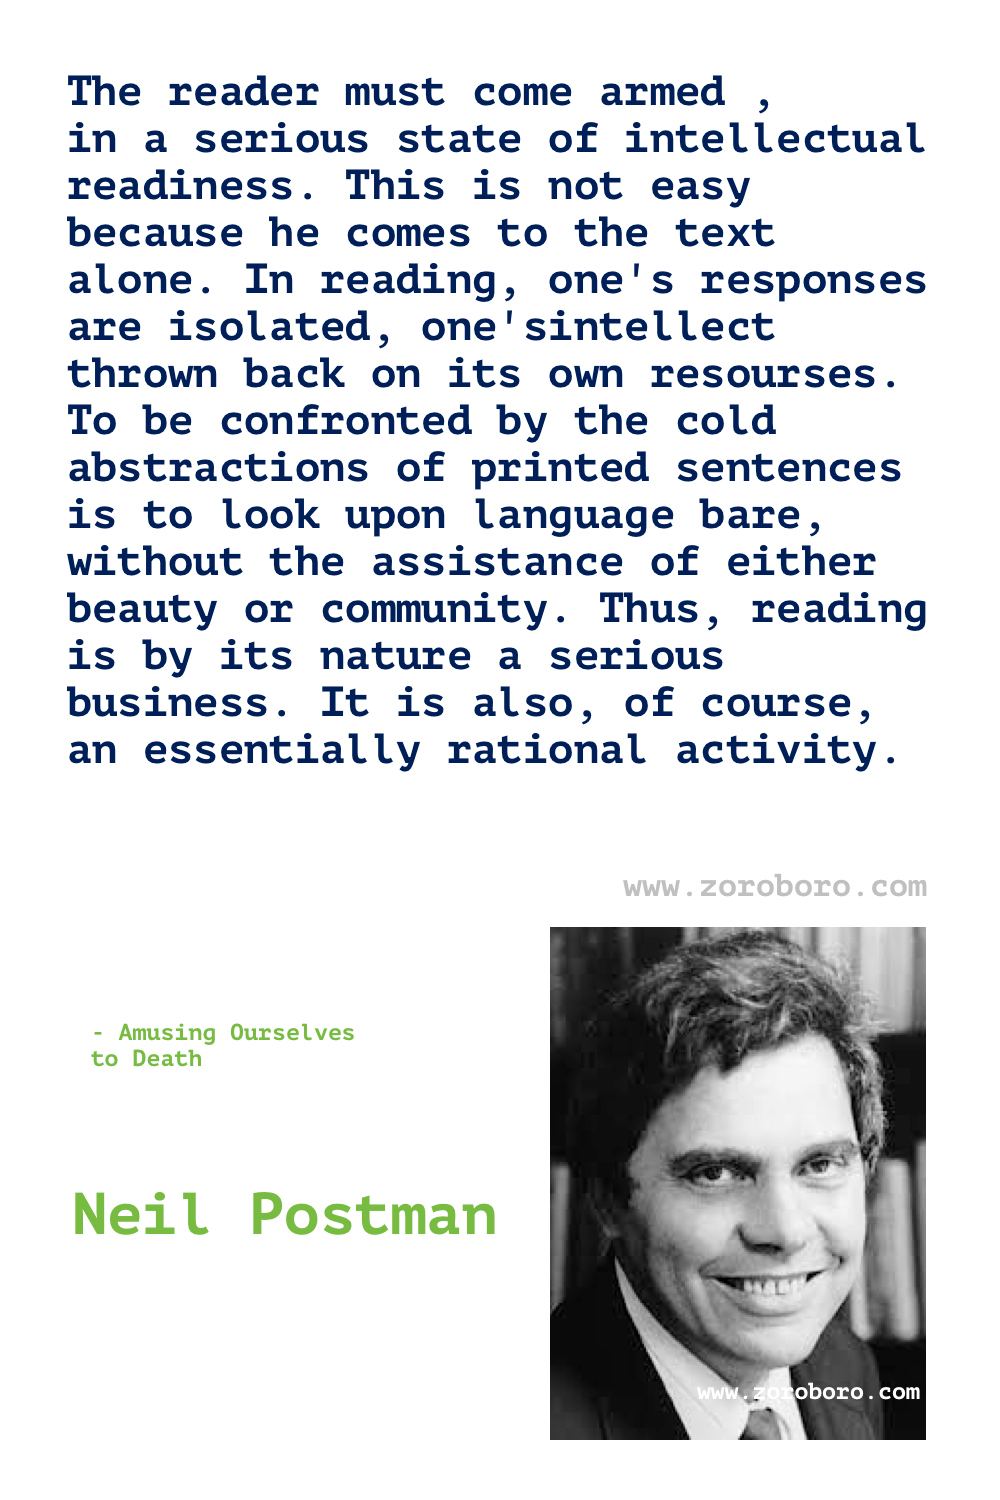 Neil Postman Quotes. Neil Postman Amusing Ourselves to Death Quotes. Neil Postman On Media, Technology, Communication & Education. Neil Postman Quotes. Neil Postman Technopoly. The End of Education.